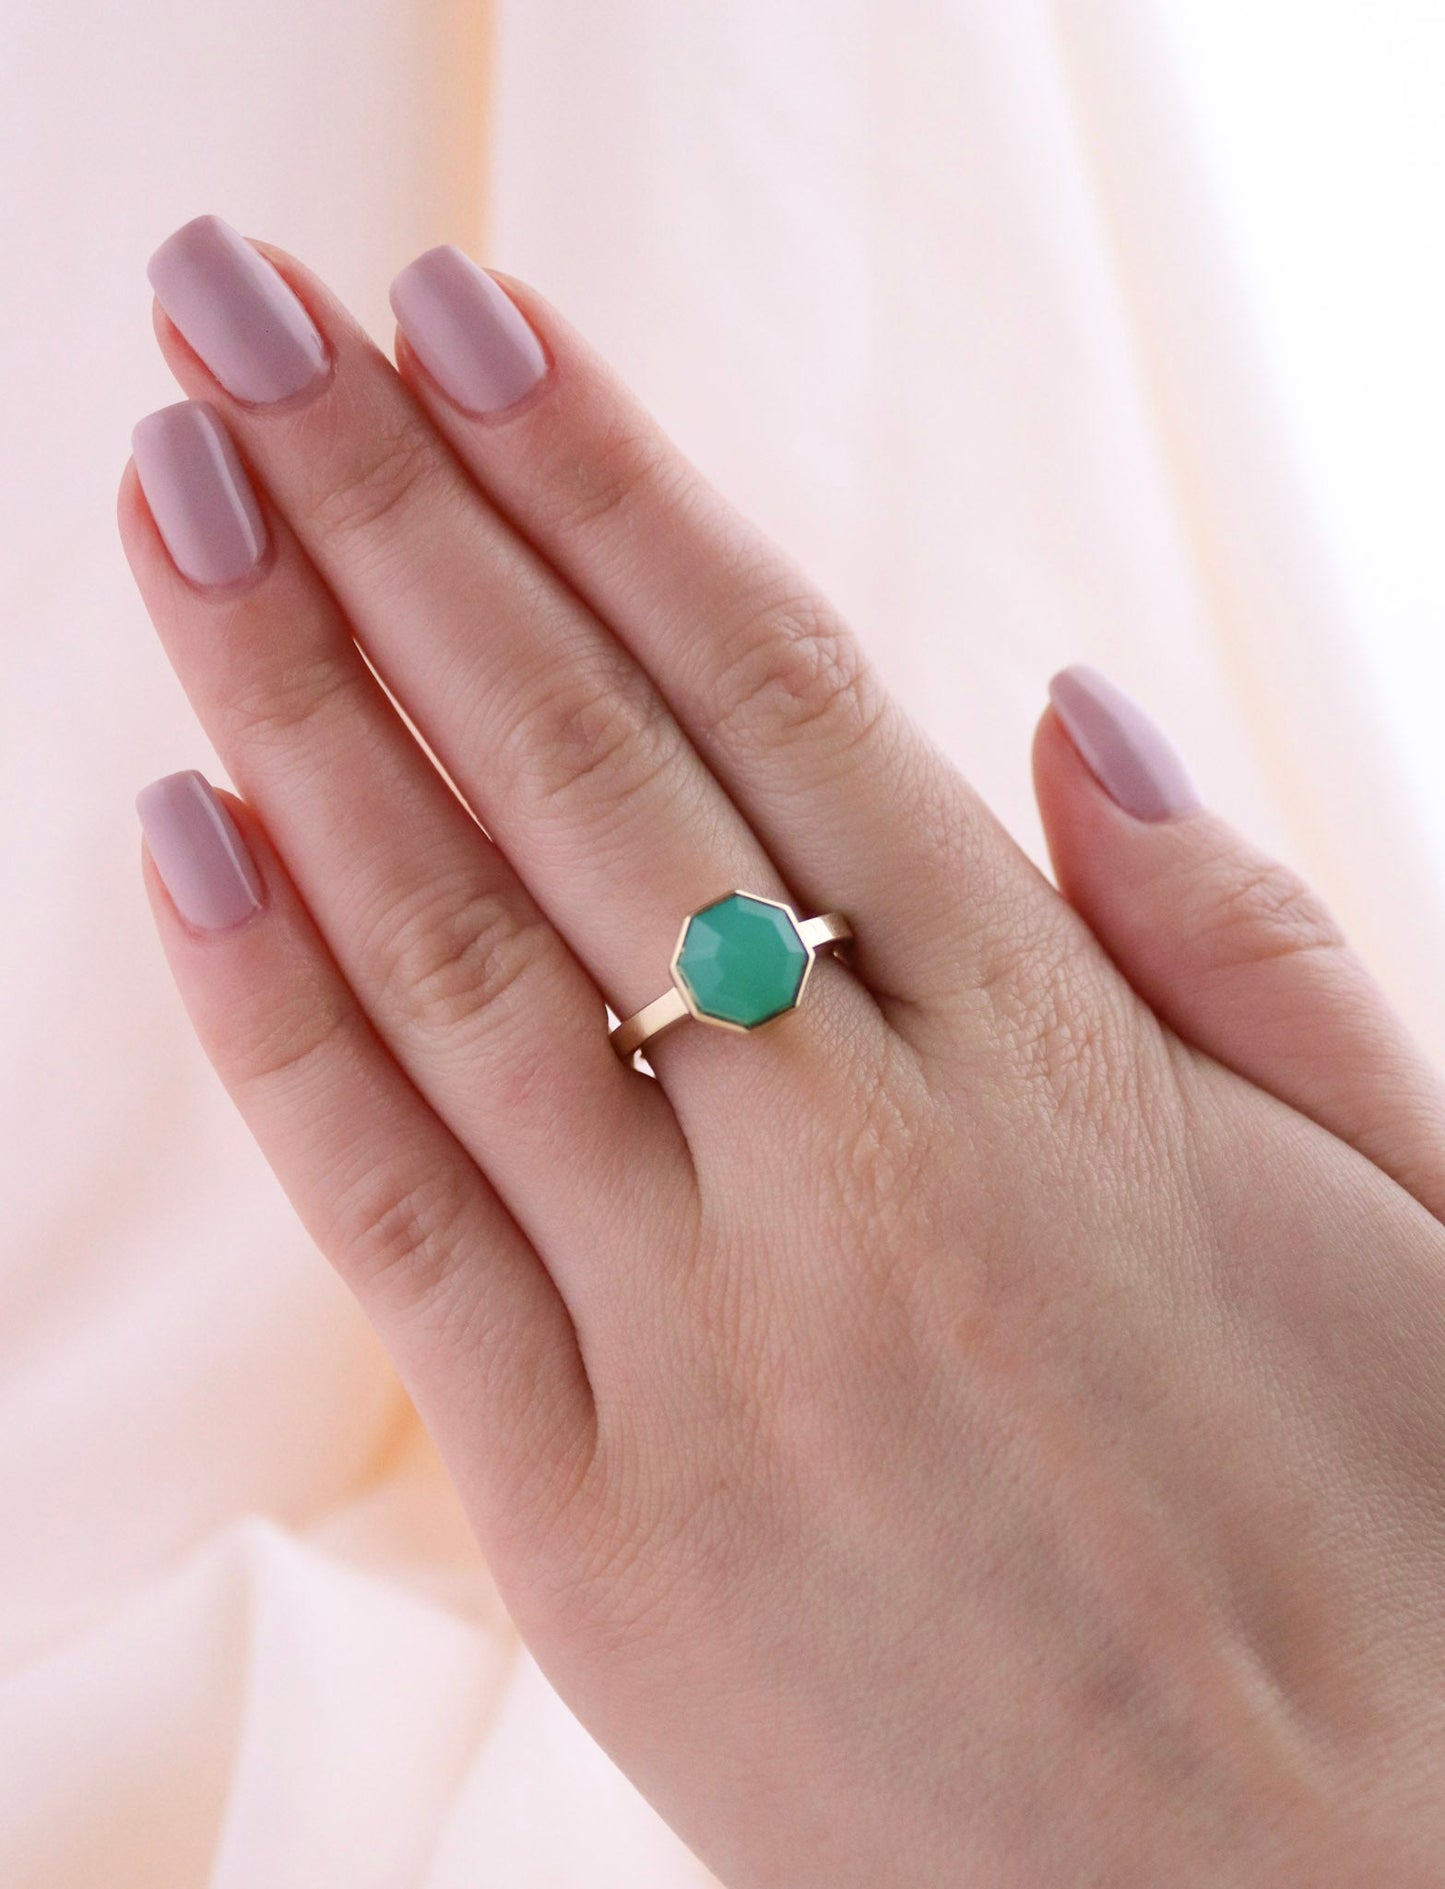 14 K Gold Faceted Chrysoprase Cocktail Ring - Kingdom Jewelry